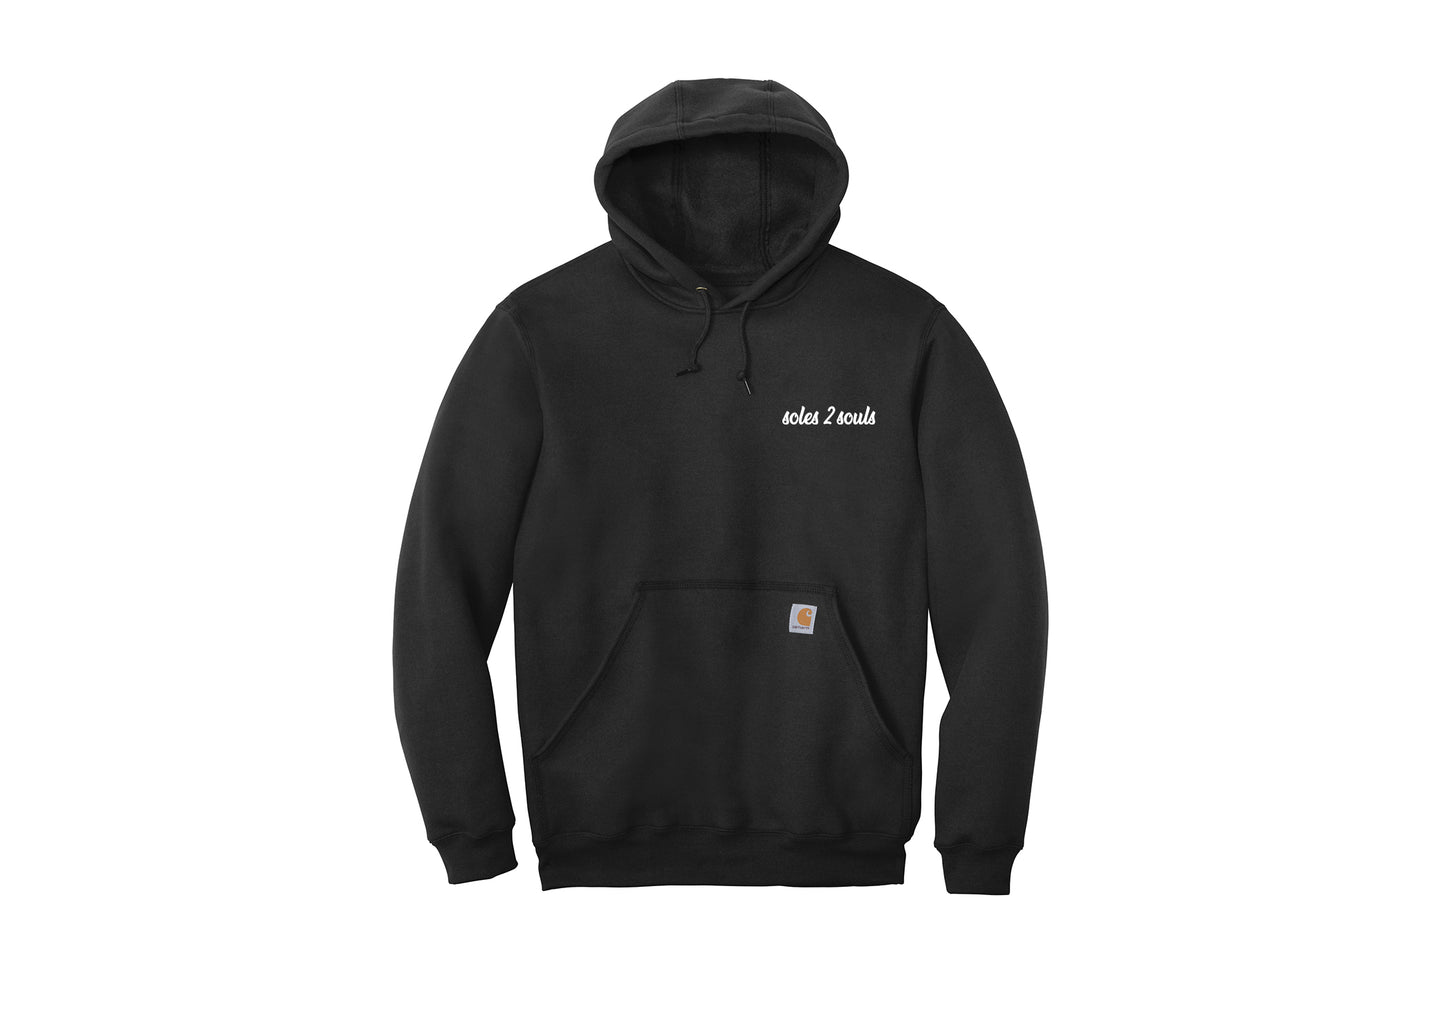 Embroidered Carhartt Hoodie